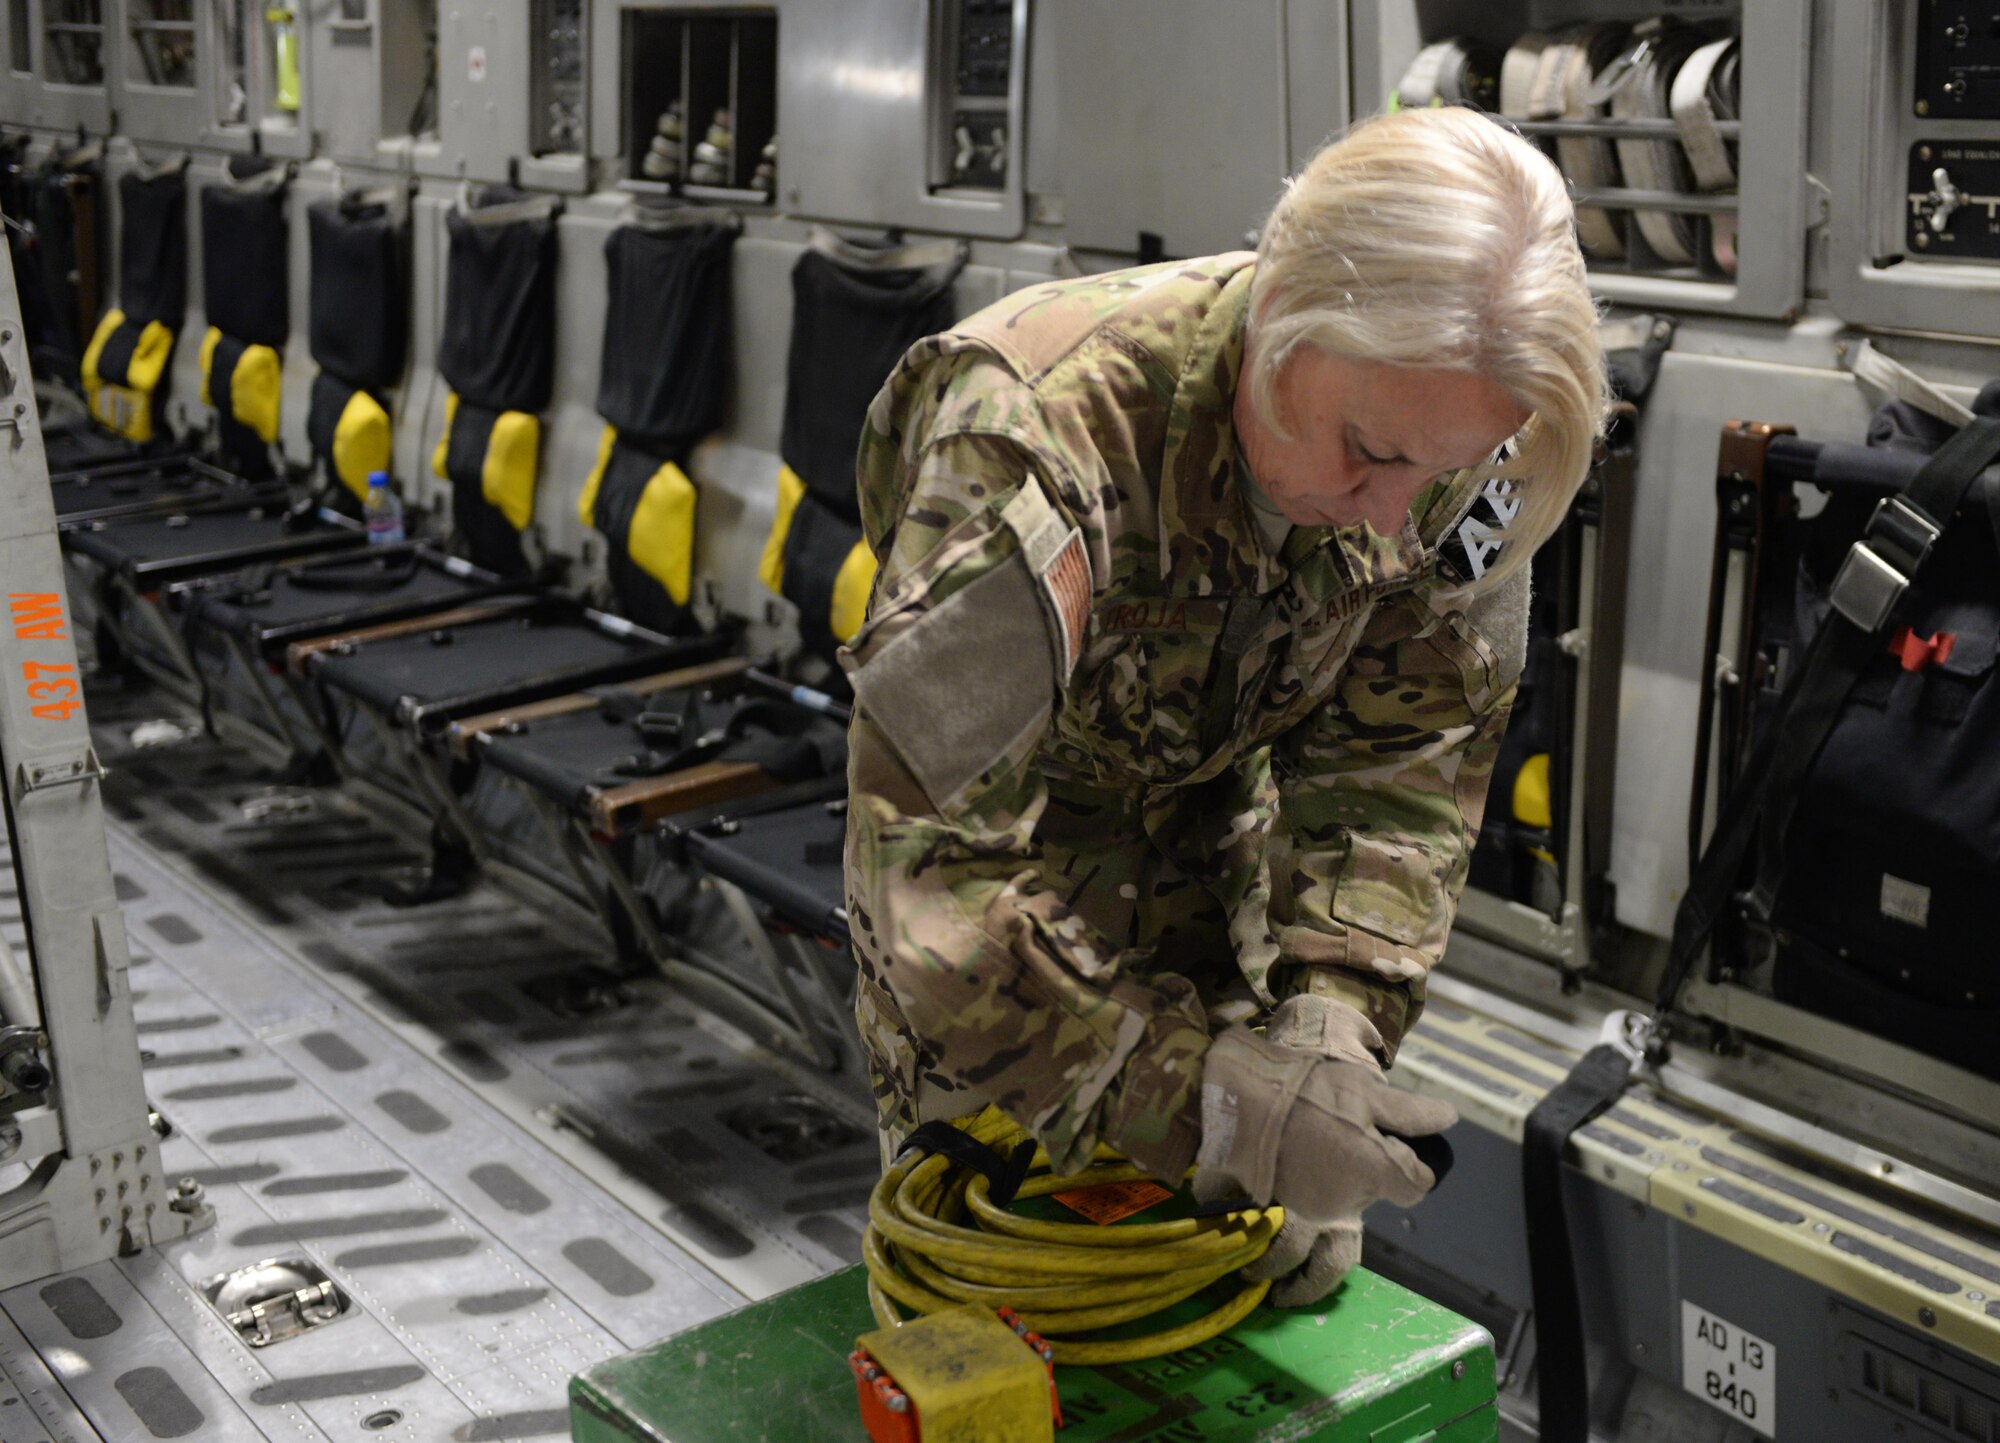 U.S. Air Force Master Sgt. Mary Troja, 455th EAES AE technician deployed from the Air Force Reserve’s 315th Air Expeditionary Squadron at Joint Base Charleston, South Carolina, and breaks down equipment on a C-17 Globemaster III aircraft that transported injured Service members from Bagram Airfield, Afghanistan, to Ramstein Air Base, Germany, Aug. 9, 2015.  The 455th EAES Airmen are charged with the responsibility of evacuating the sick and wounded from Central Command to higher echelons of medical care. (U.S. Air Force photo by Maj. Tony Wickman/Released)